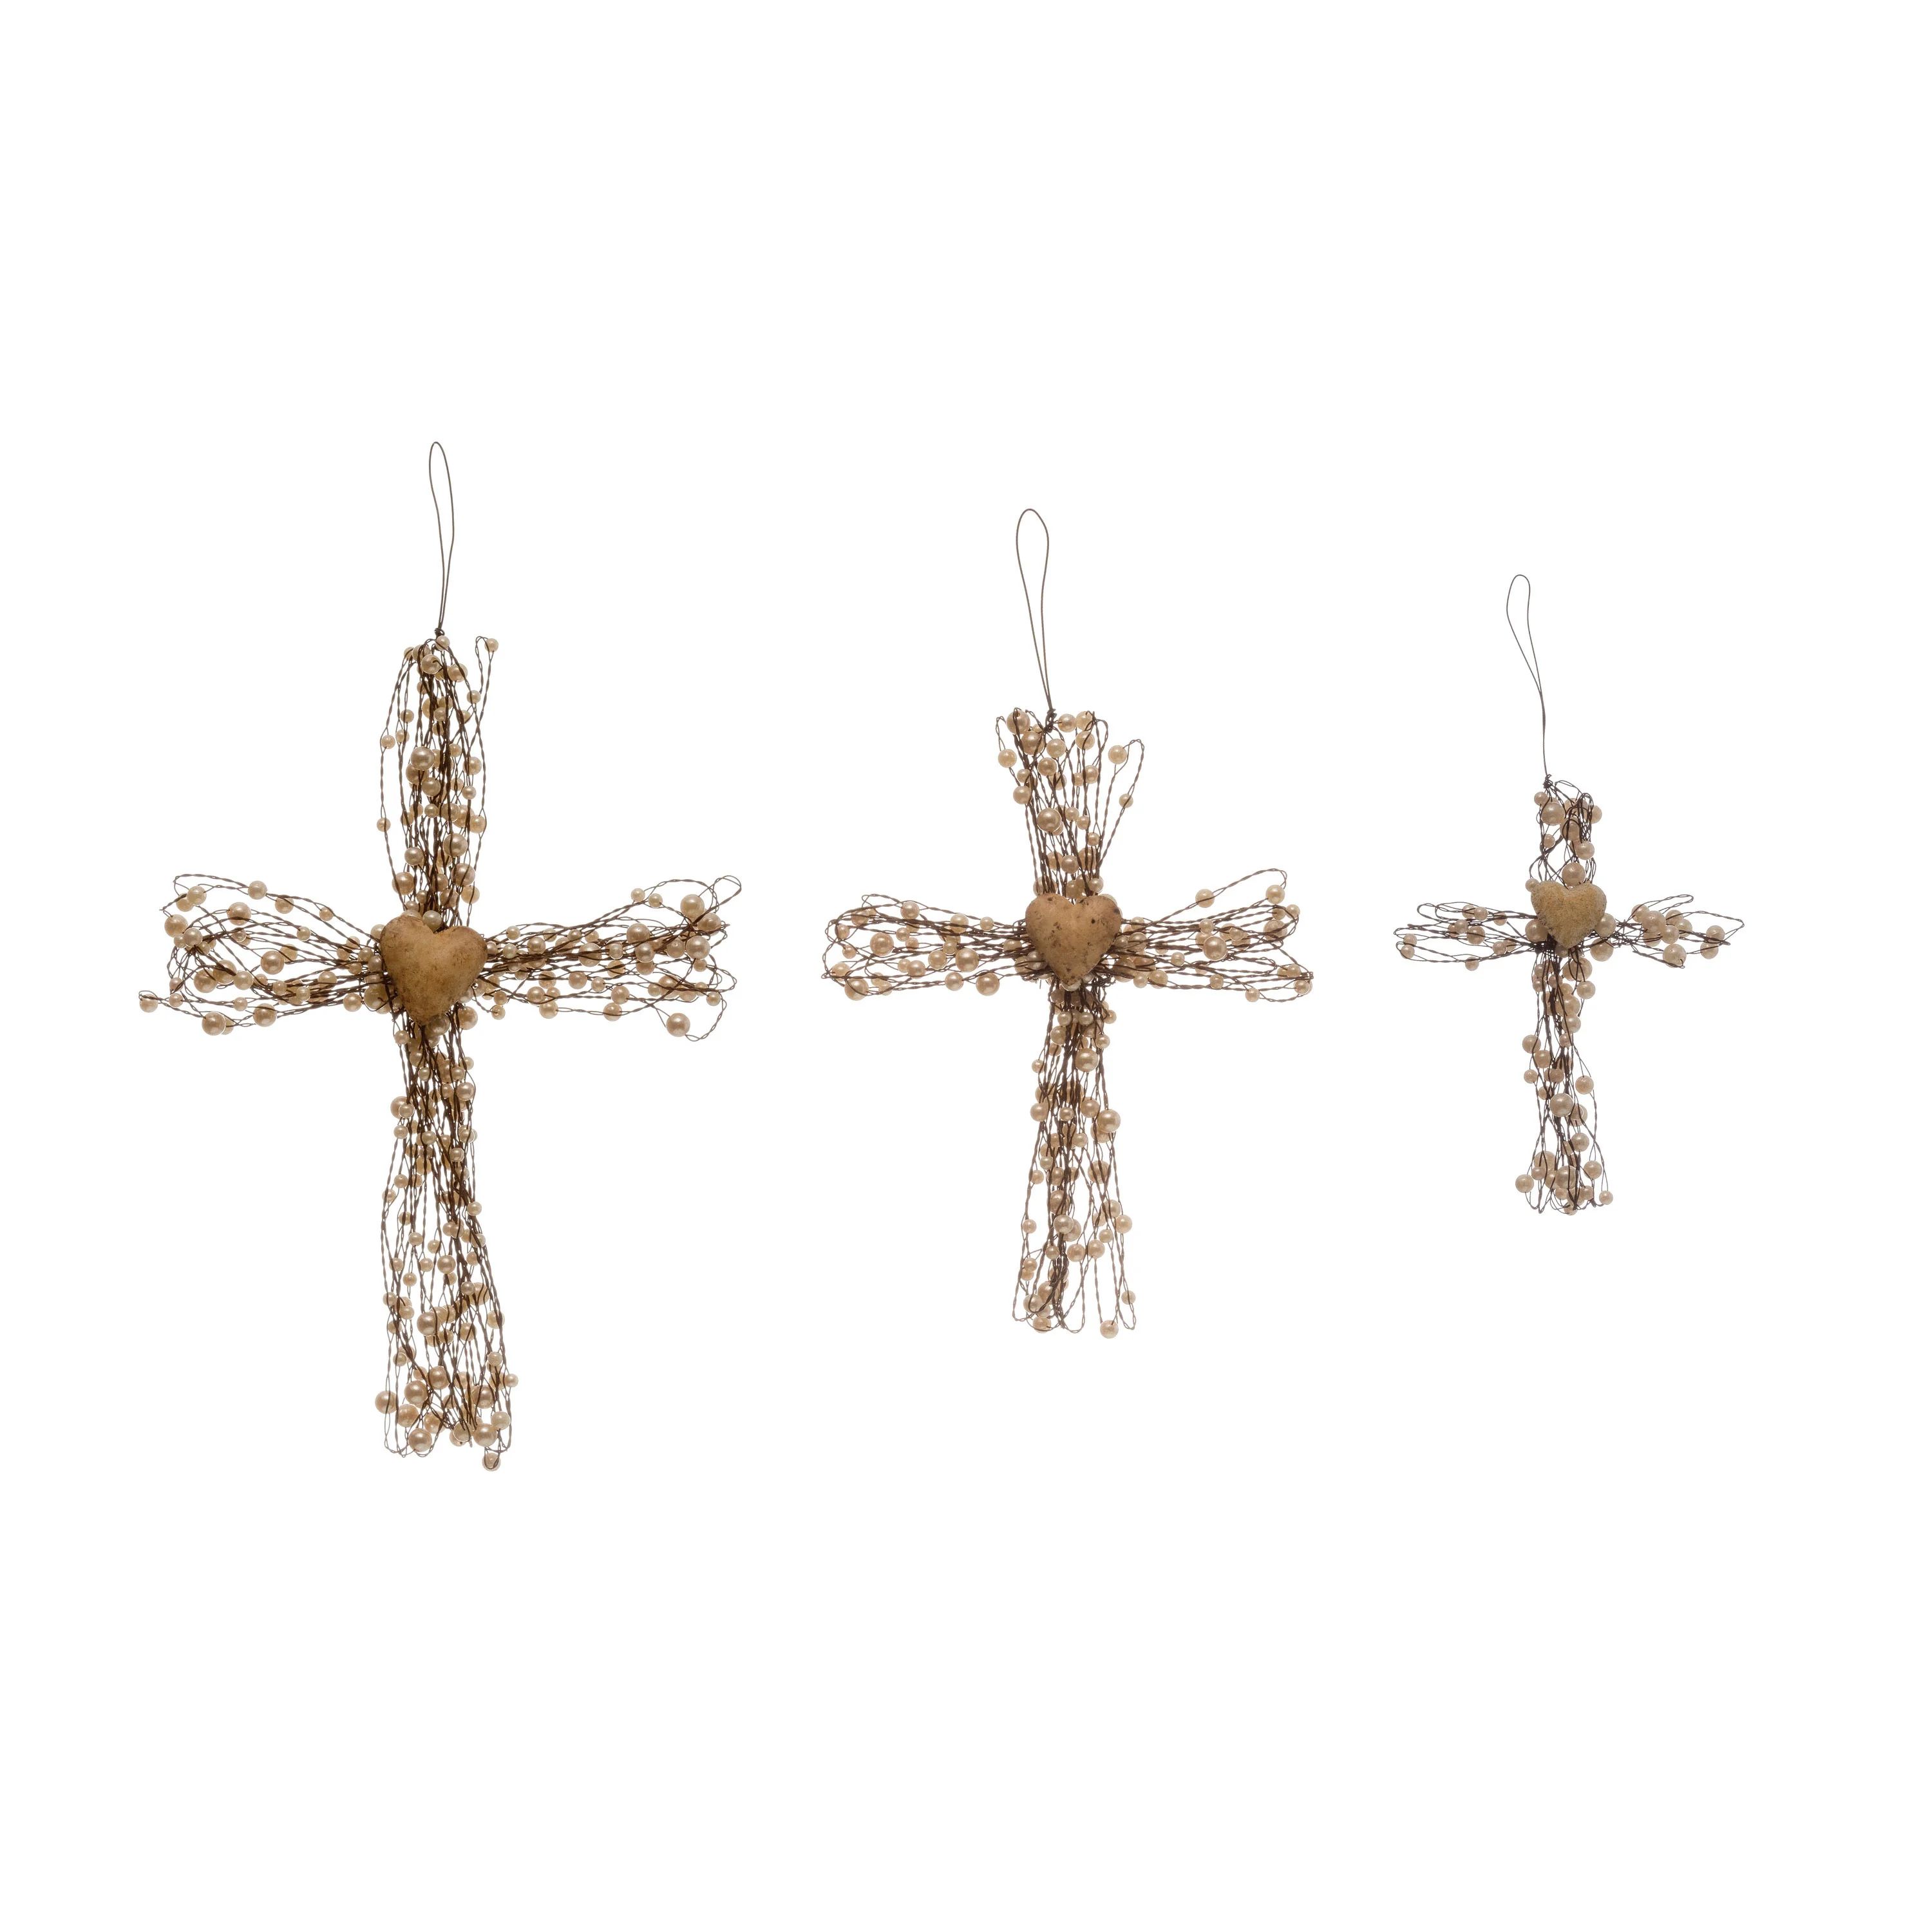 3 Piece Metal Wire Cross Holiday Shaped Ornament Set | Wayfair North America